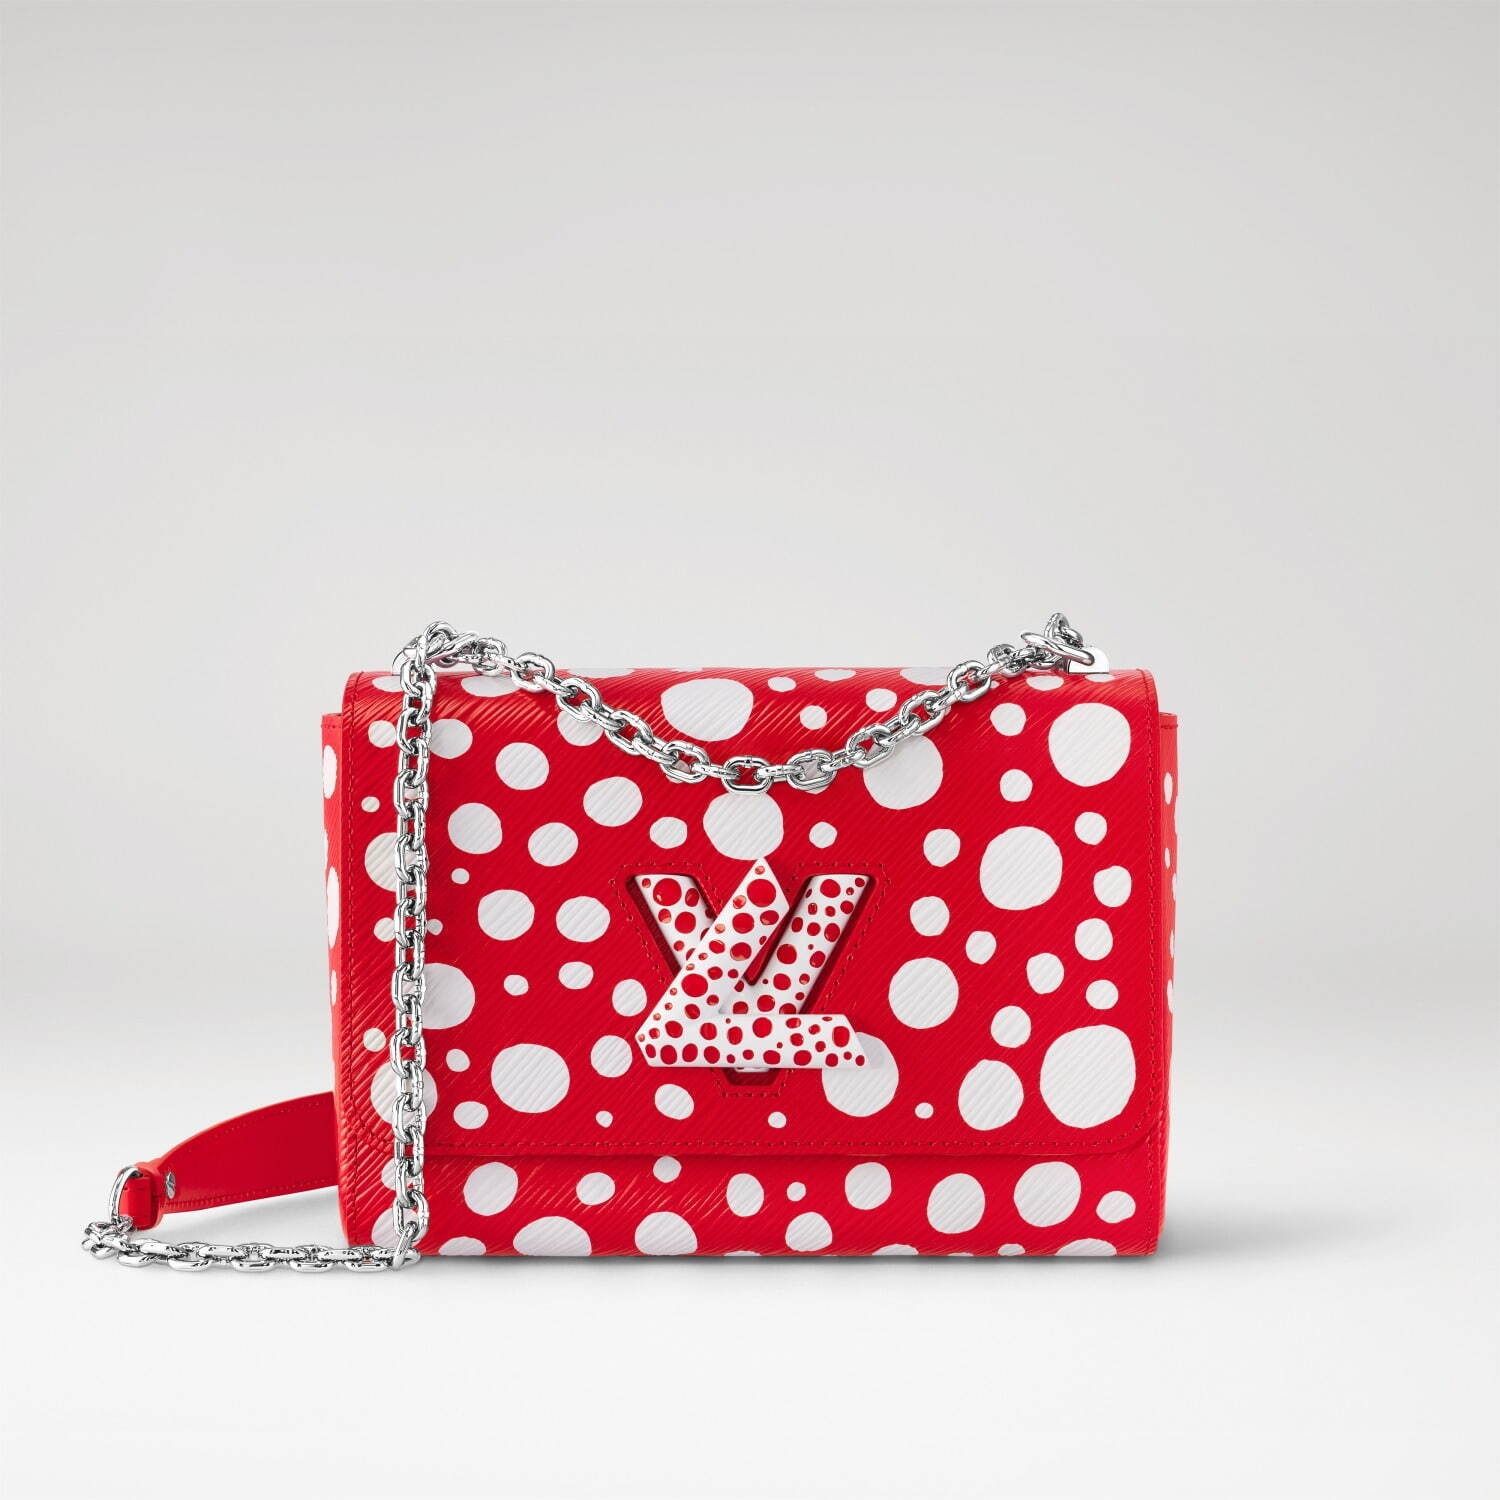 Louis Vuitton's second collaboration with Yayoi Kusama expands their  infinite worlds